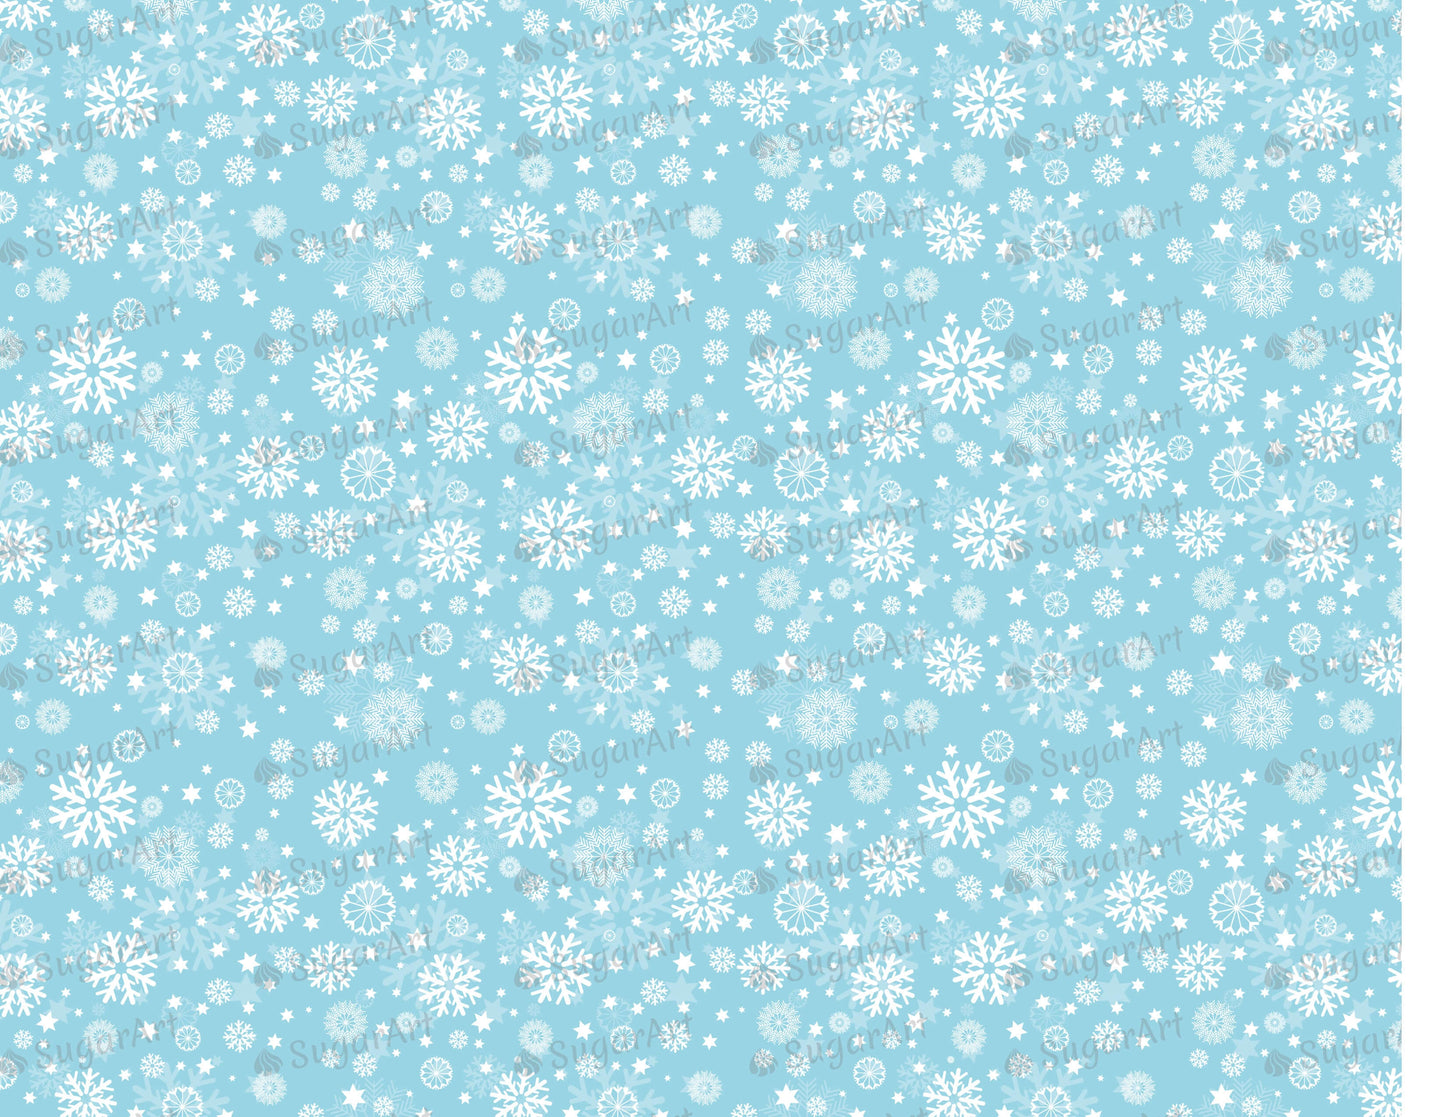 White Snowflakes on Blue Background - Icing - ISA184.